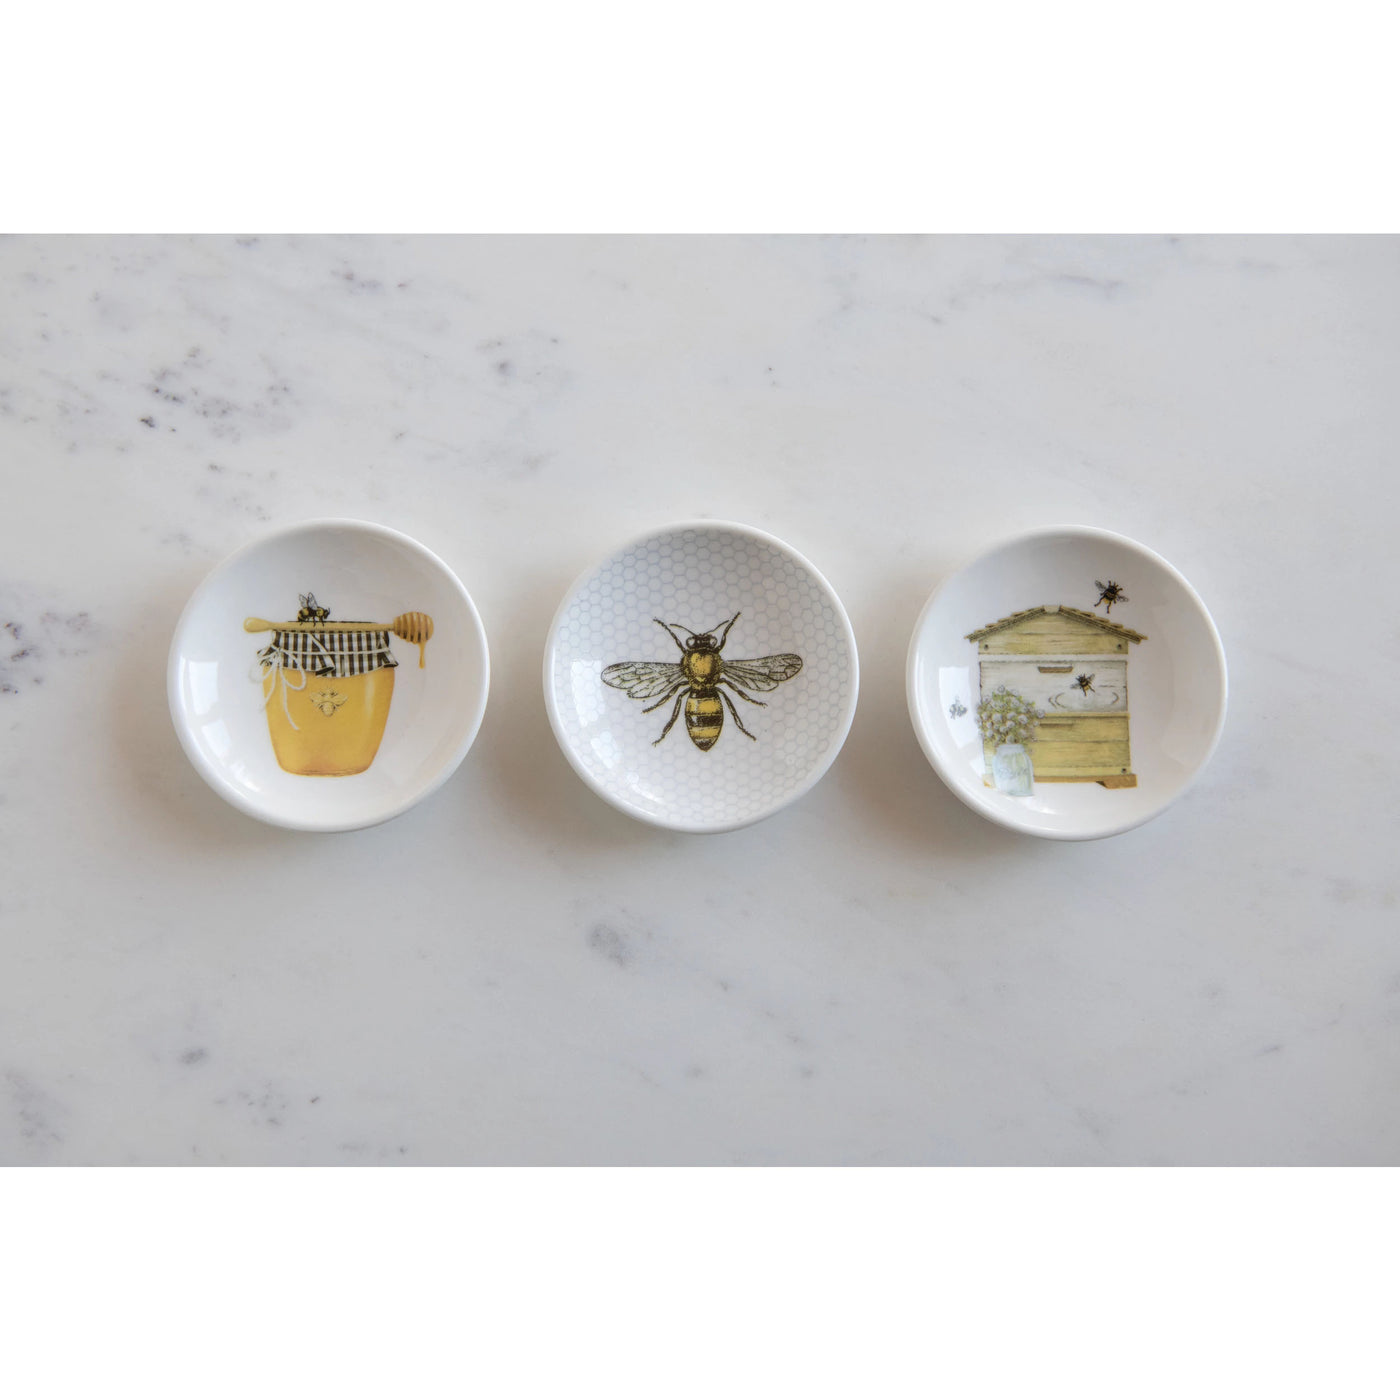 Set of 3 Bumble Bee Dishes